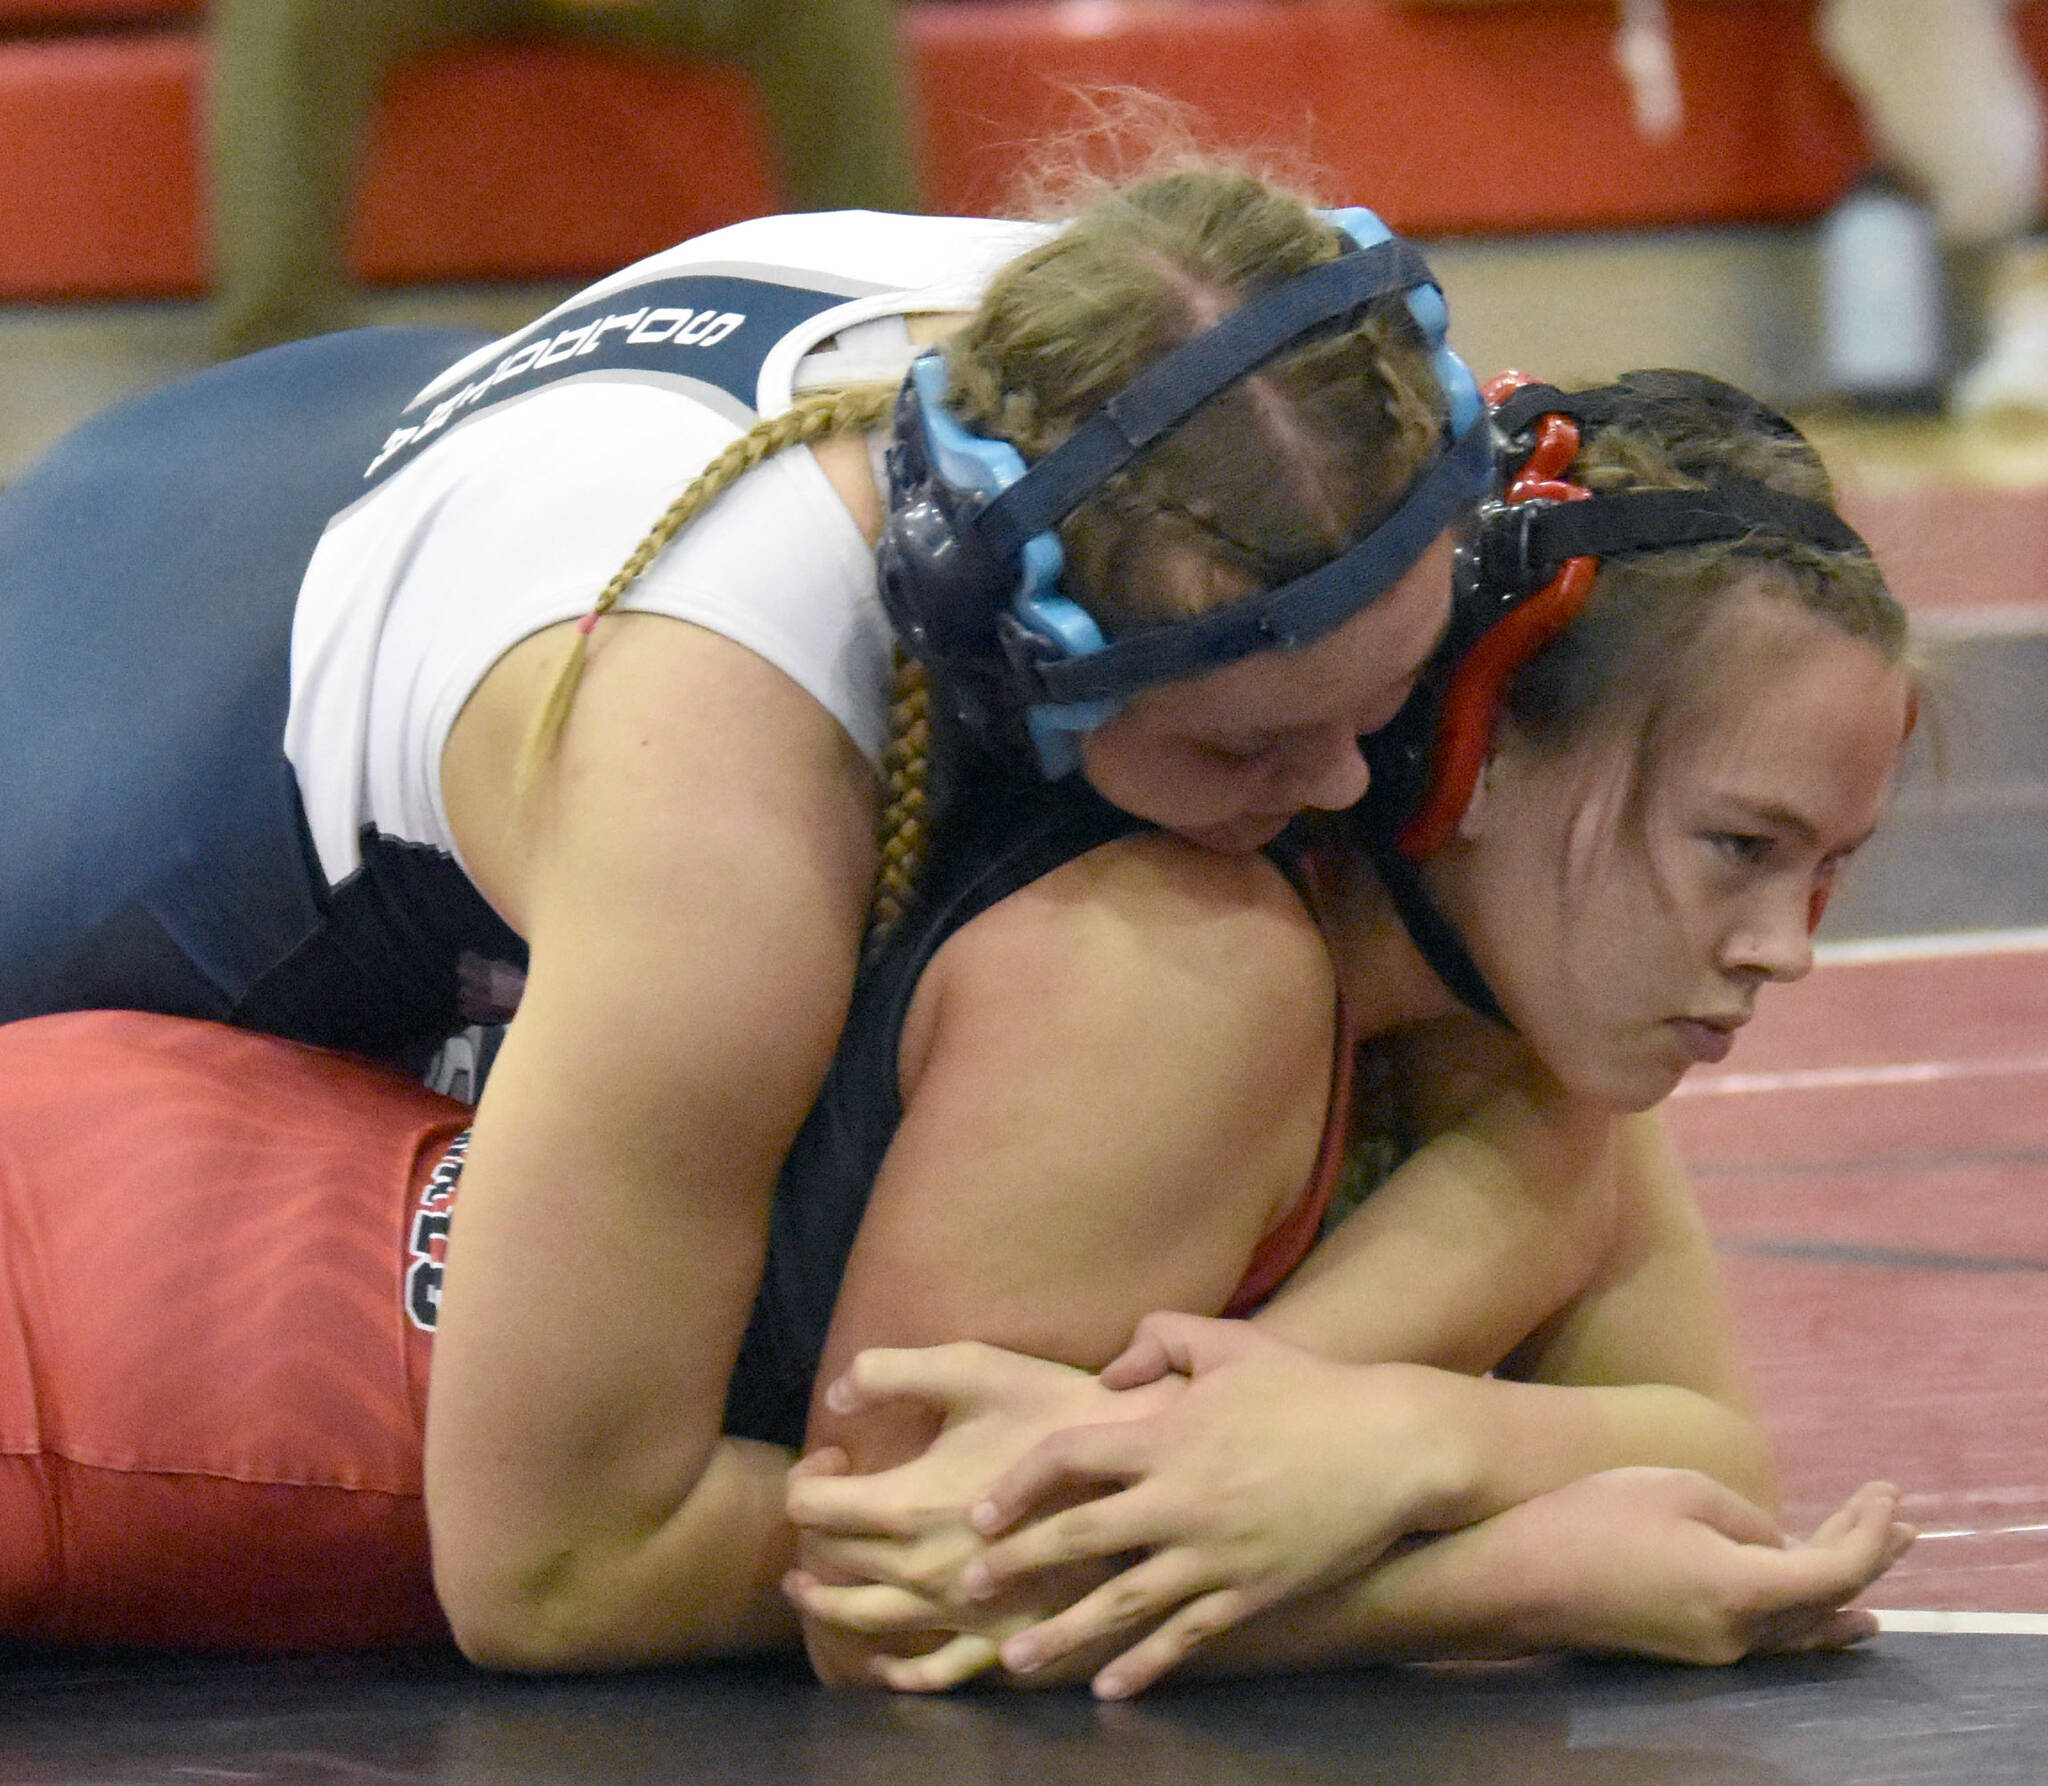 Soldotna’s Daisy Hannevold wrestles with Kenai Central’s Jalyn Yeoman at girls 138 pounds at the Luke Spruill Memorial Tournament on Saturday, Oct. 22, 2022, at Kenai Central High School in Kenai, Alaska. Hannevold was able to pin Yeoman. (Photo by Jeff Helminiak/Peninsula Clarion)